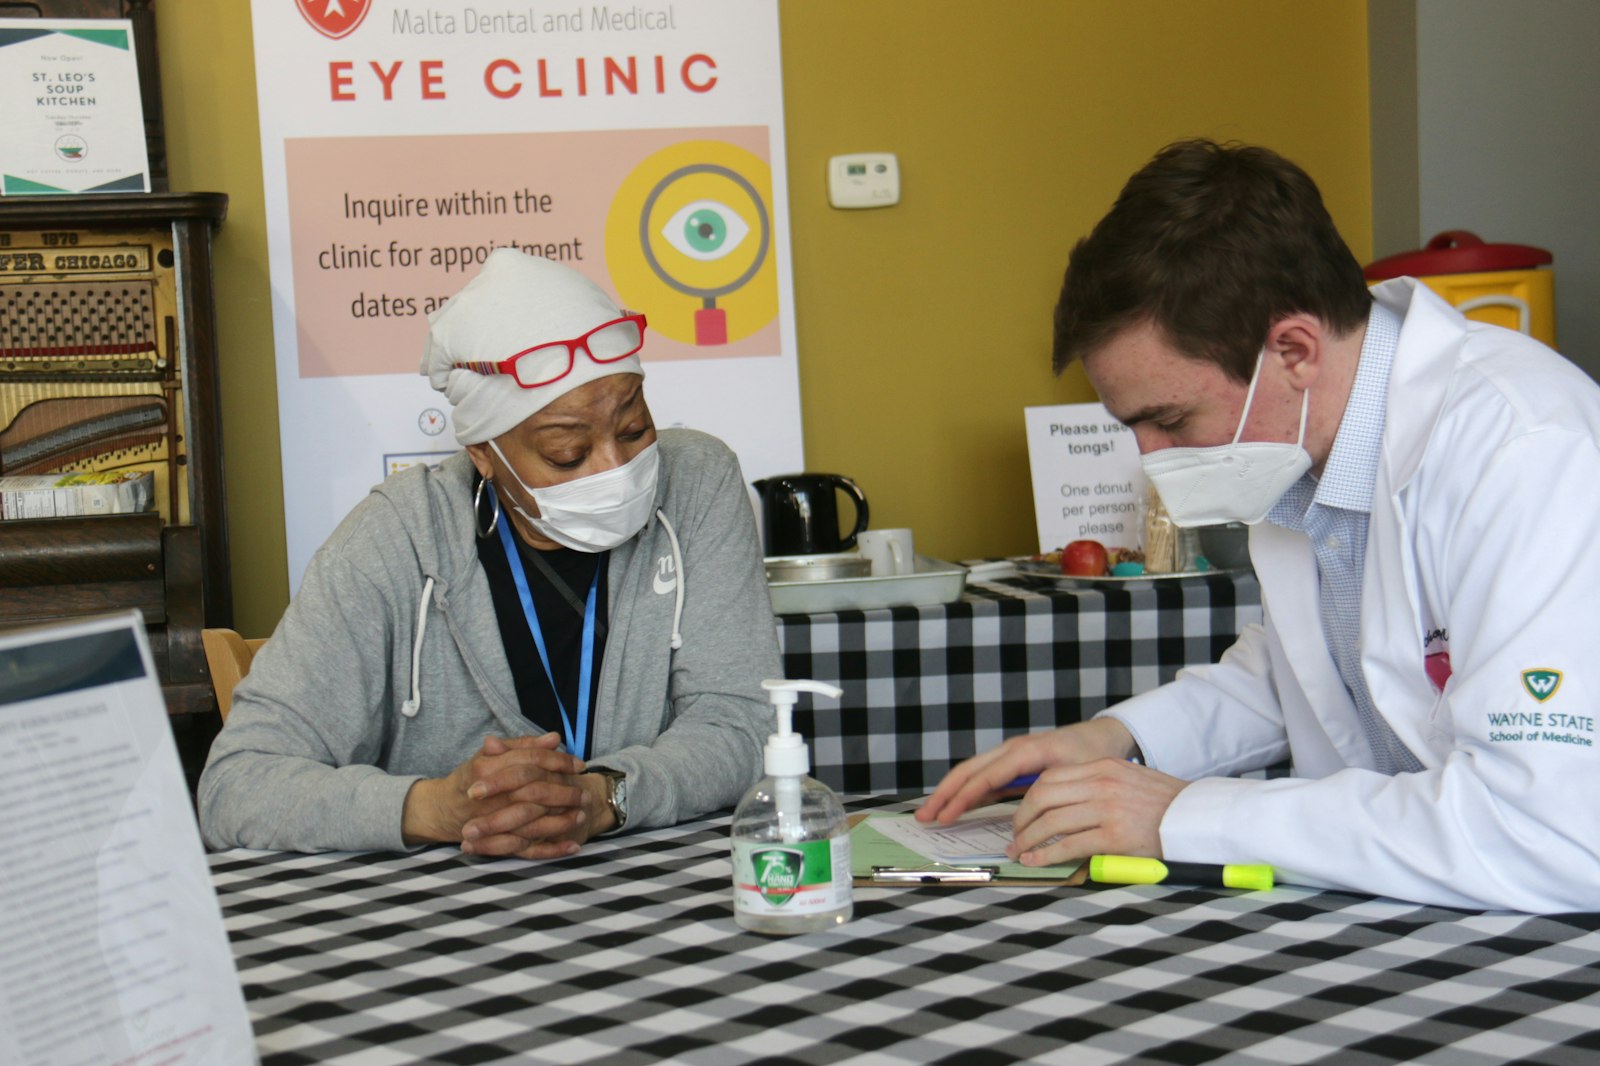 Anthony Mrocko examines Cathryn Anderson's medical history before her appointment at the Malta Eye Clinic at the Catholic Charities of Southeast Michigan Center for the Works of Mercy. The eye clinic will be open once a month, providing free eye care to low-income individuals.